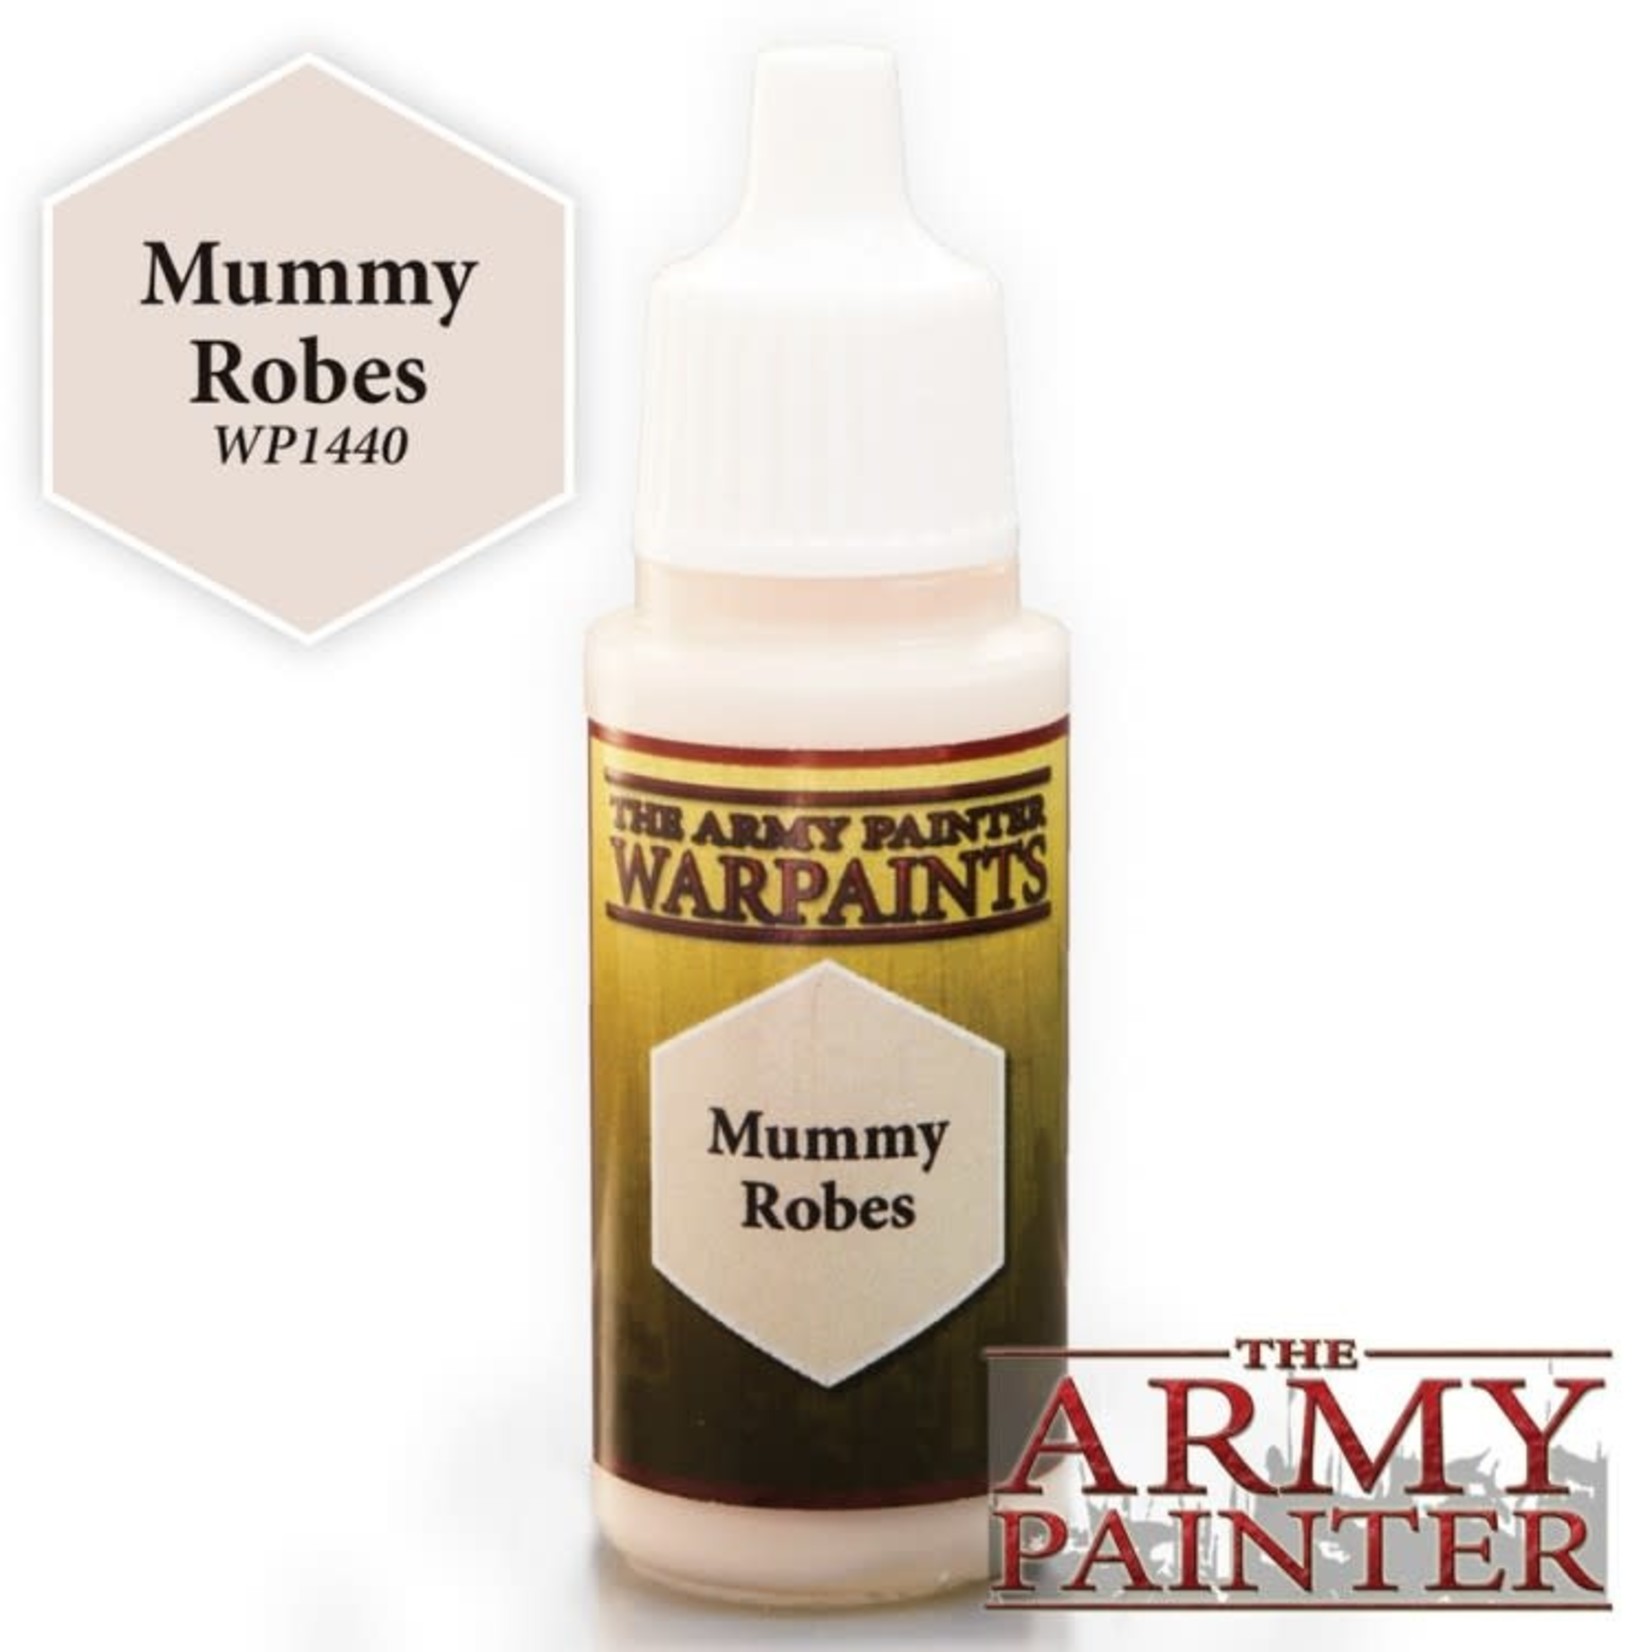 Army Painter Army Painter Warpaints Mummy Robes